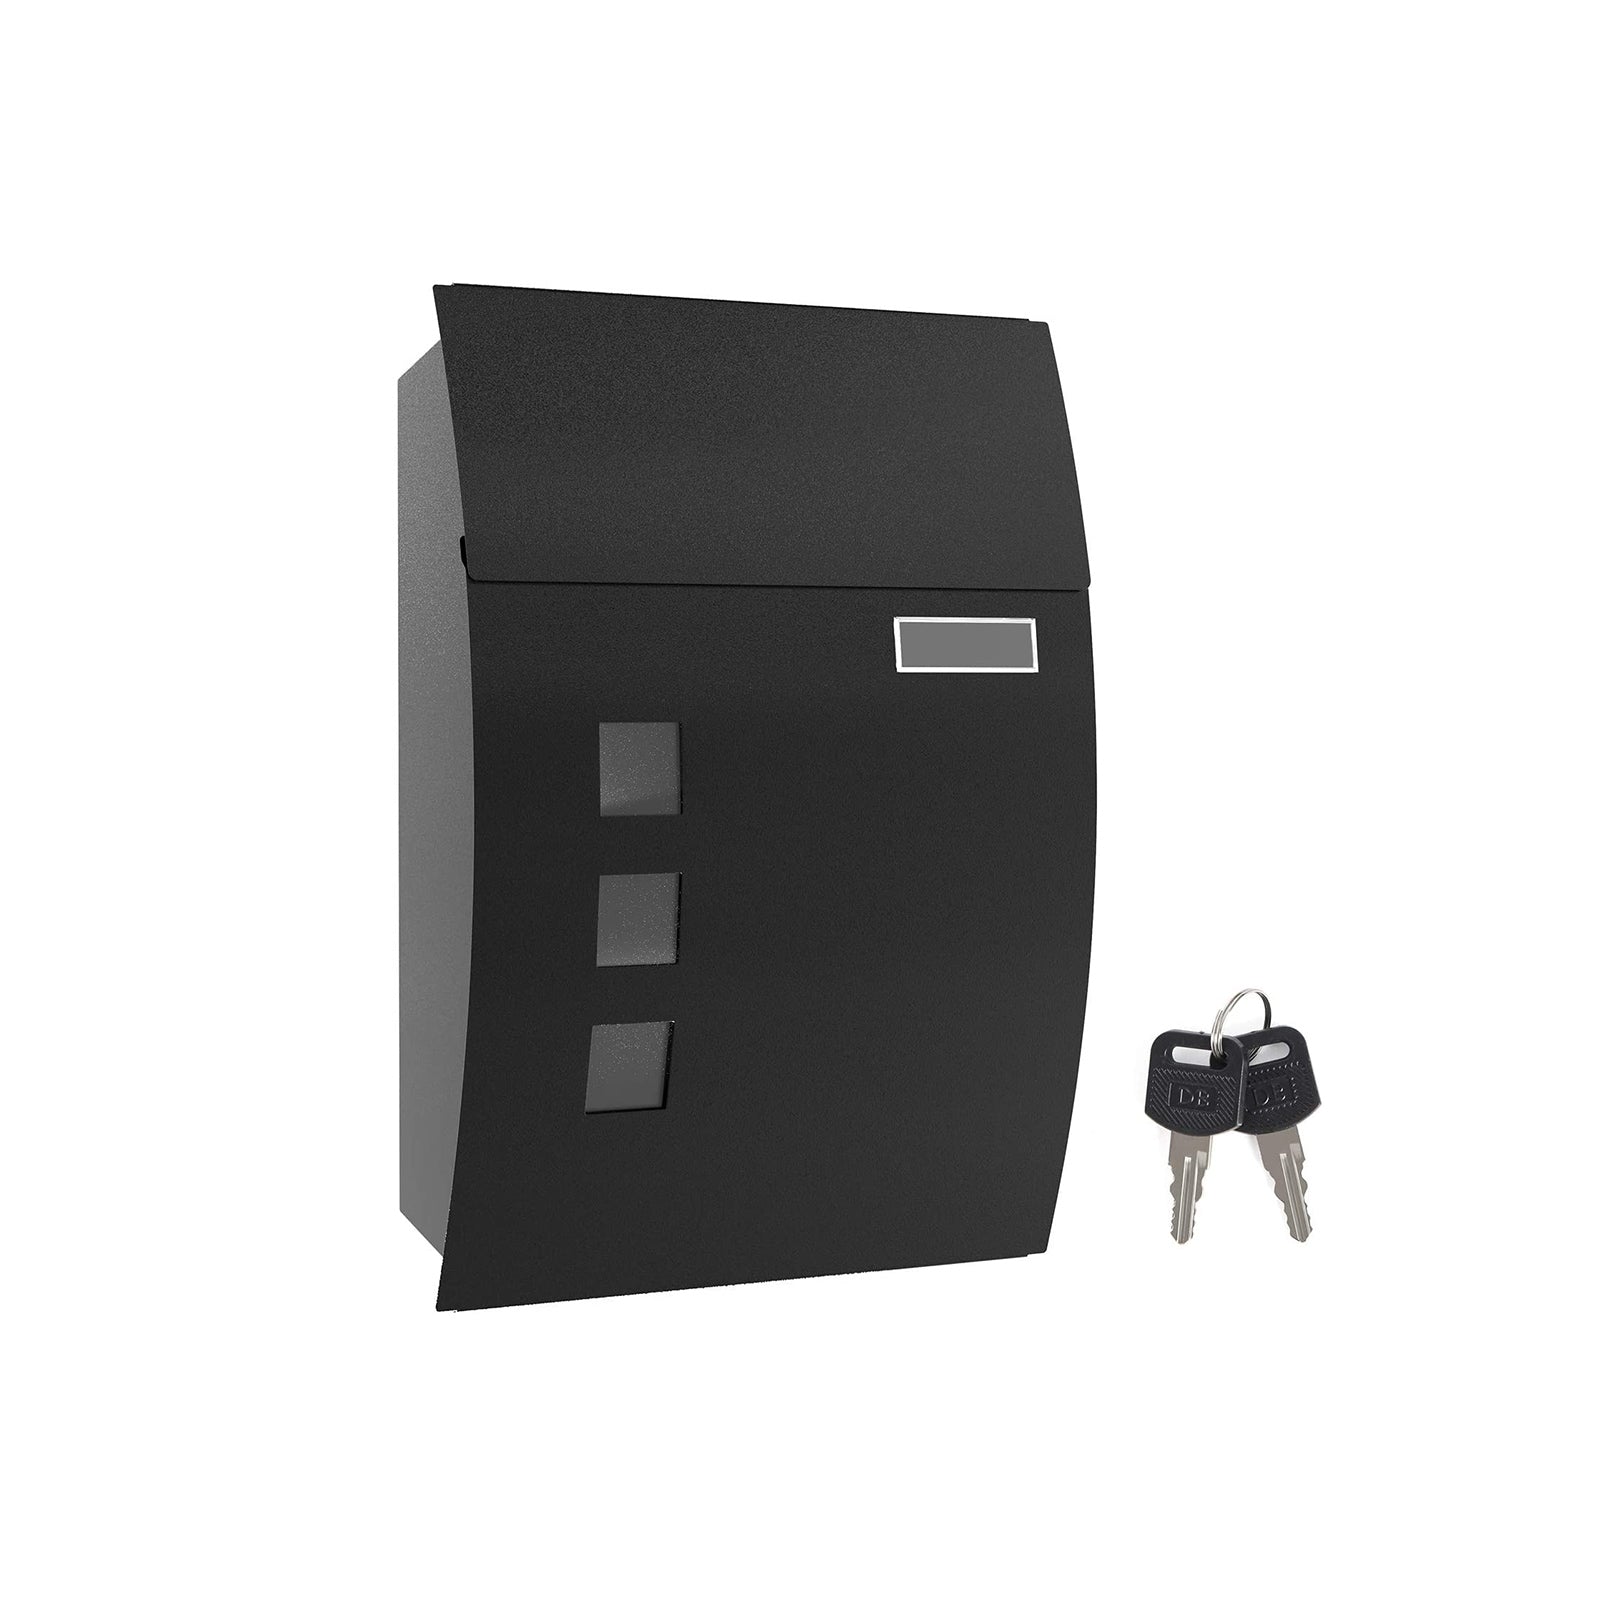 Image of Mailbox, Wall-Mounted Lockable Post Letter Box with Viewing Windows, Nameplate, and Keys, Easy to Install, Black GMB30BK - Songmics